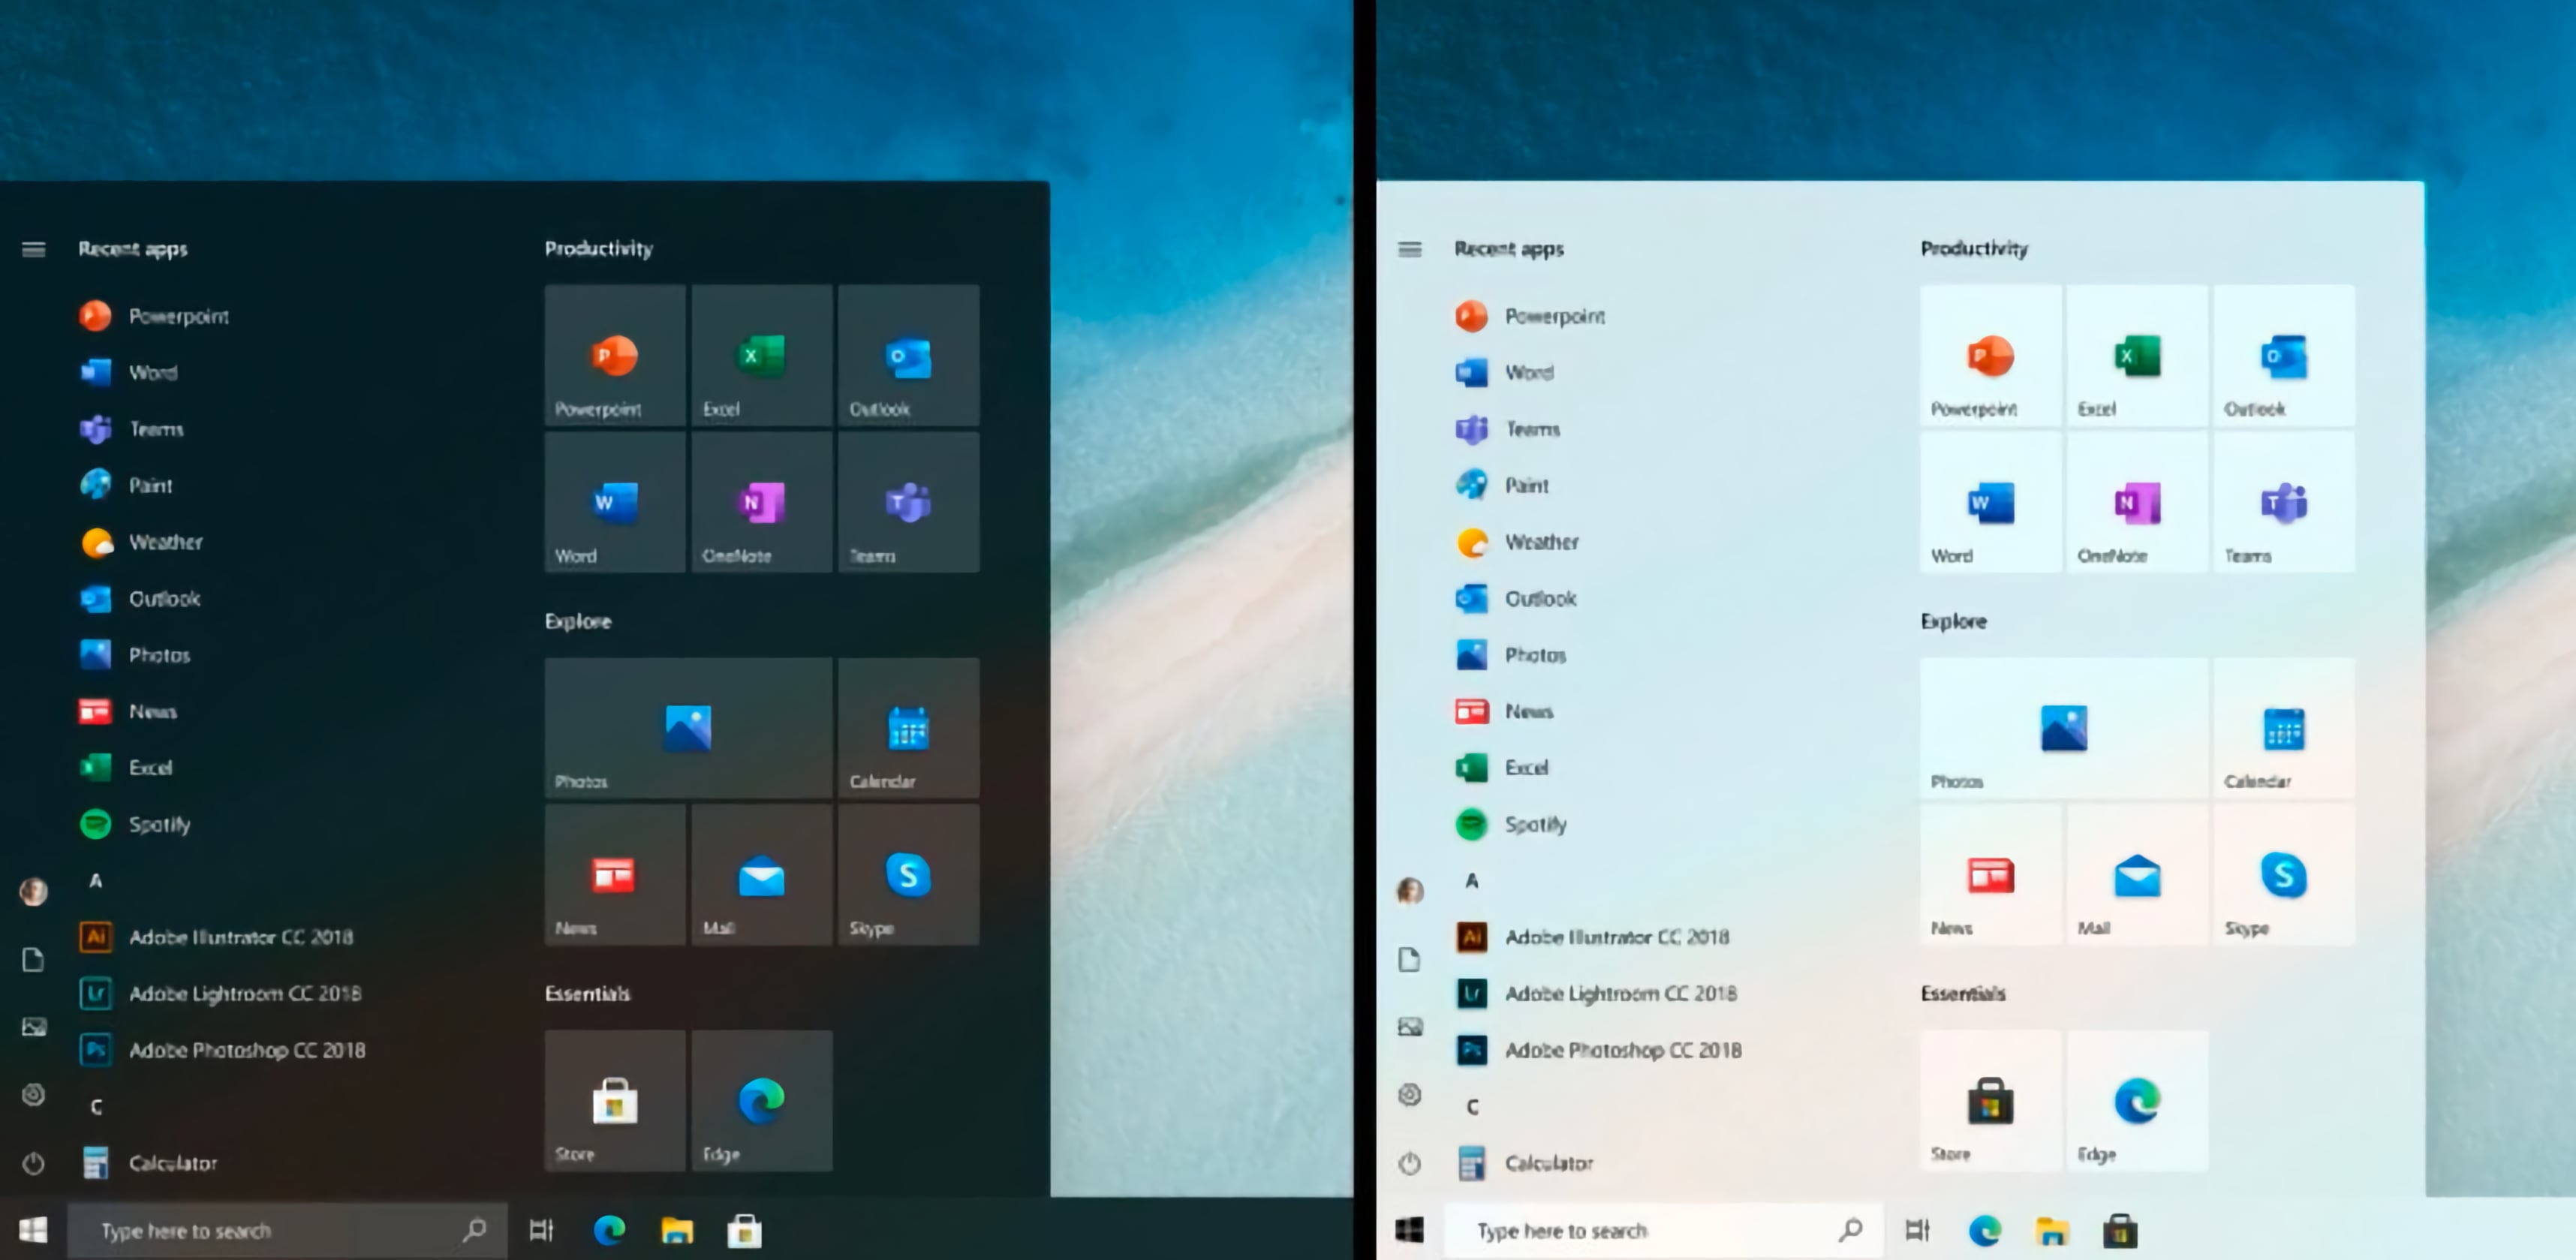 Microsoft is exploring a new direction for the Start Menu, says Live Tiles aren't going anywhere